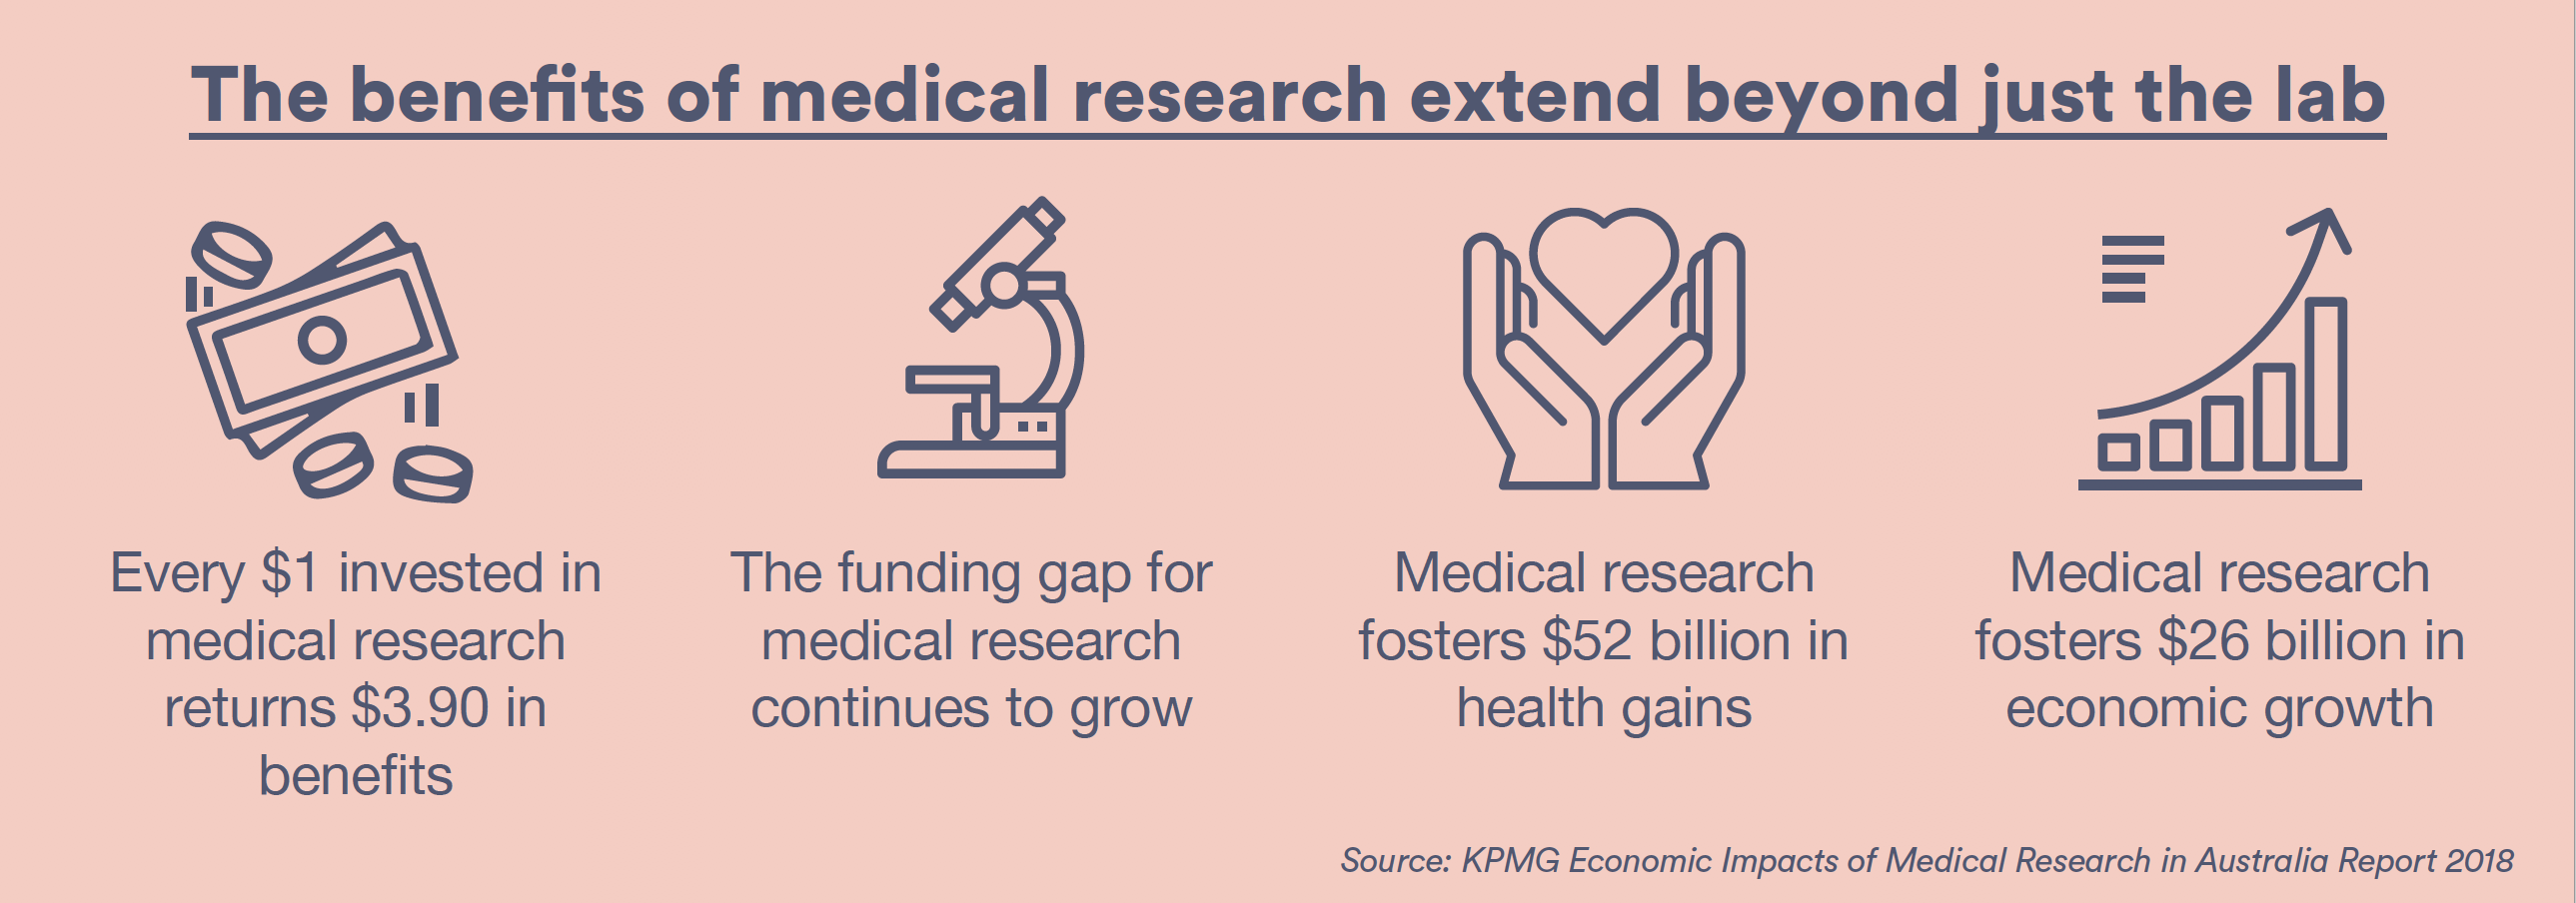 benefits of medical research extend beyond the lab